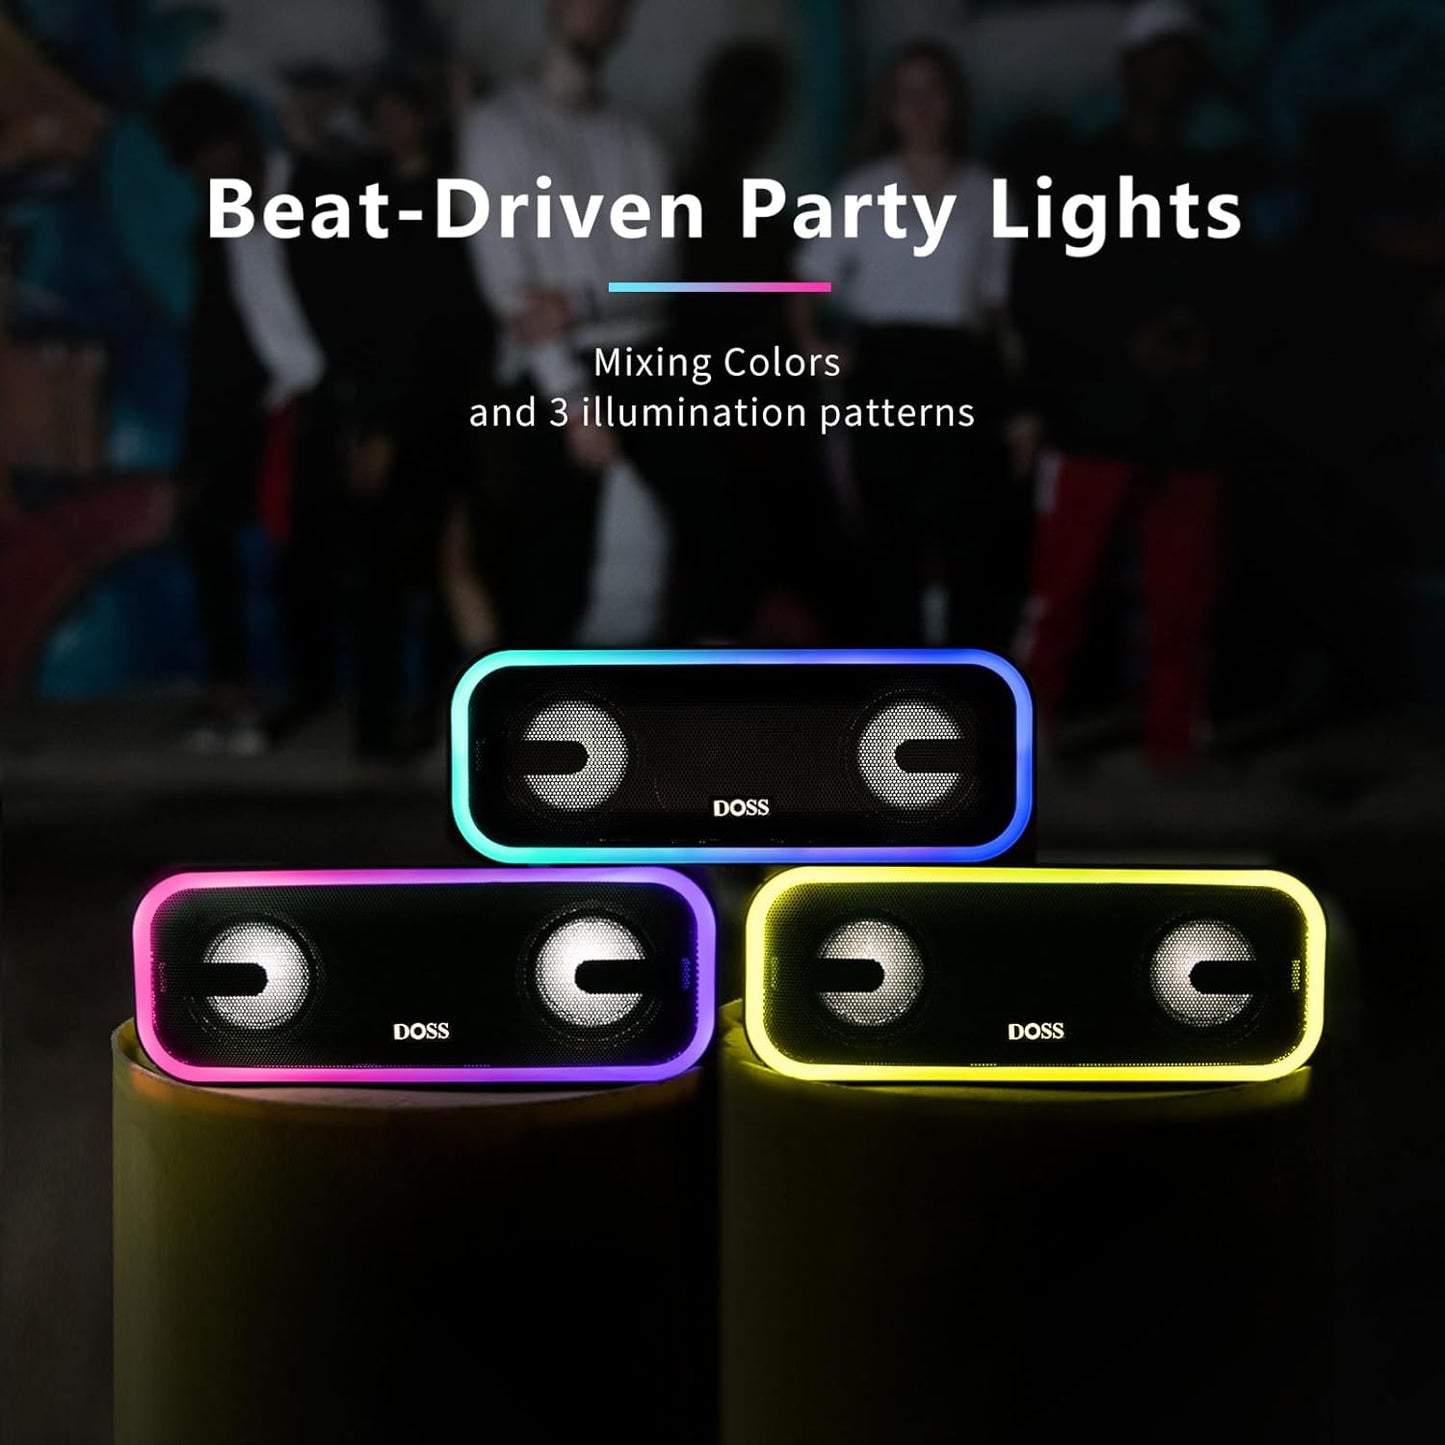 Bluetooth Speaker, Soundbox Pro+ Wireless Bluetooth Speaker with 24W Impressive Sound, Booming Bass, IPX6 Waterproof, 15Hrs Playtime, Wireless Stereo Pairing, Mixed Colors Lights, 66 FT- Grey